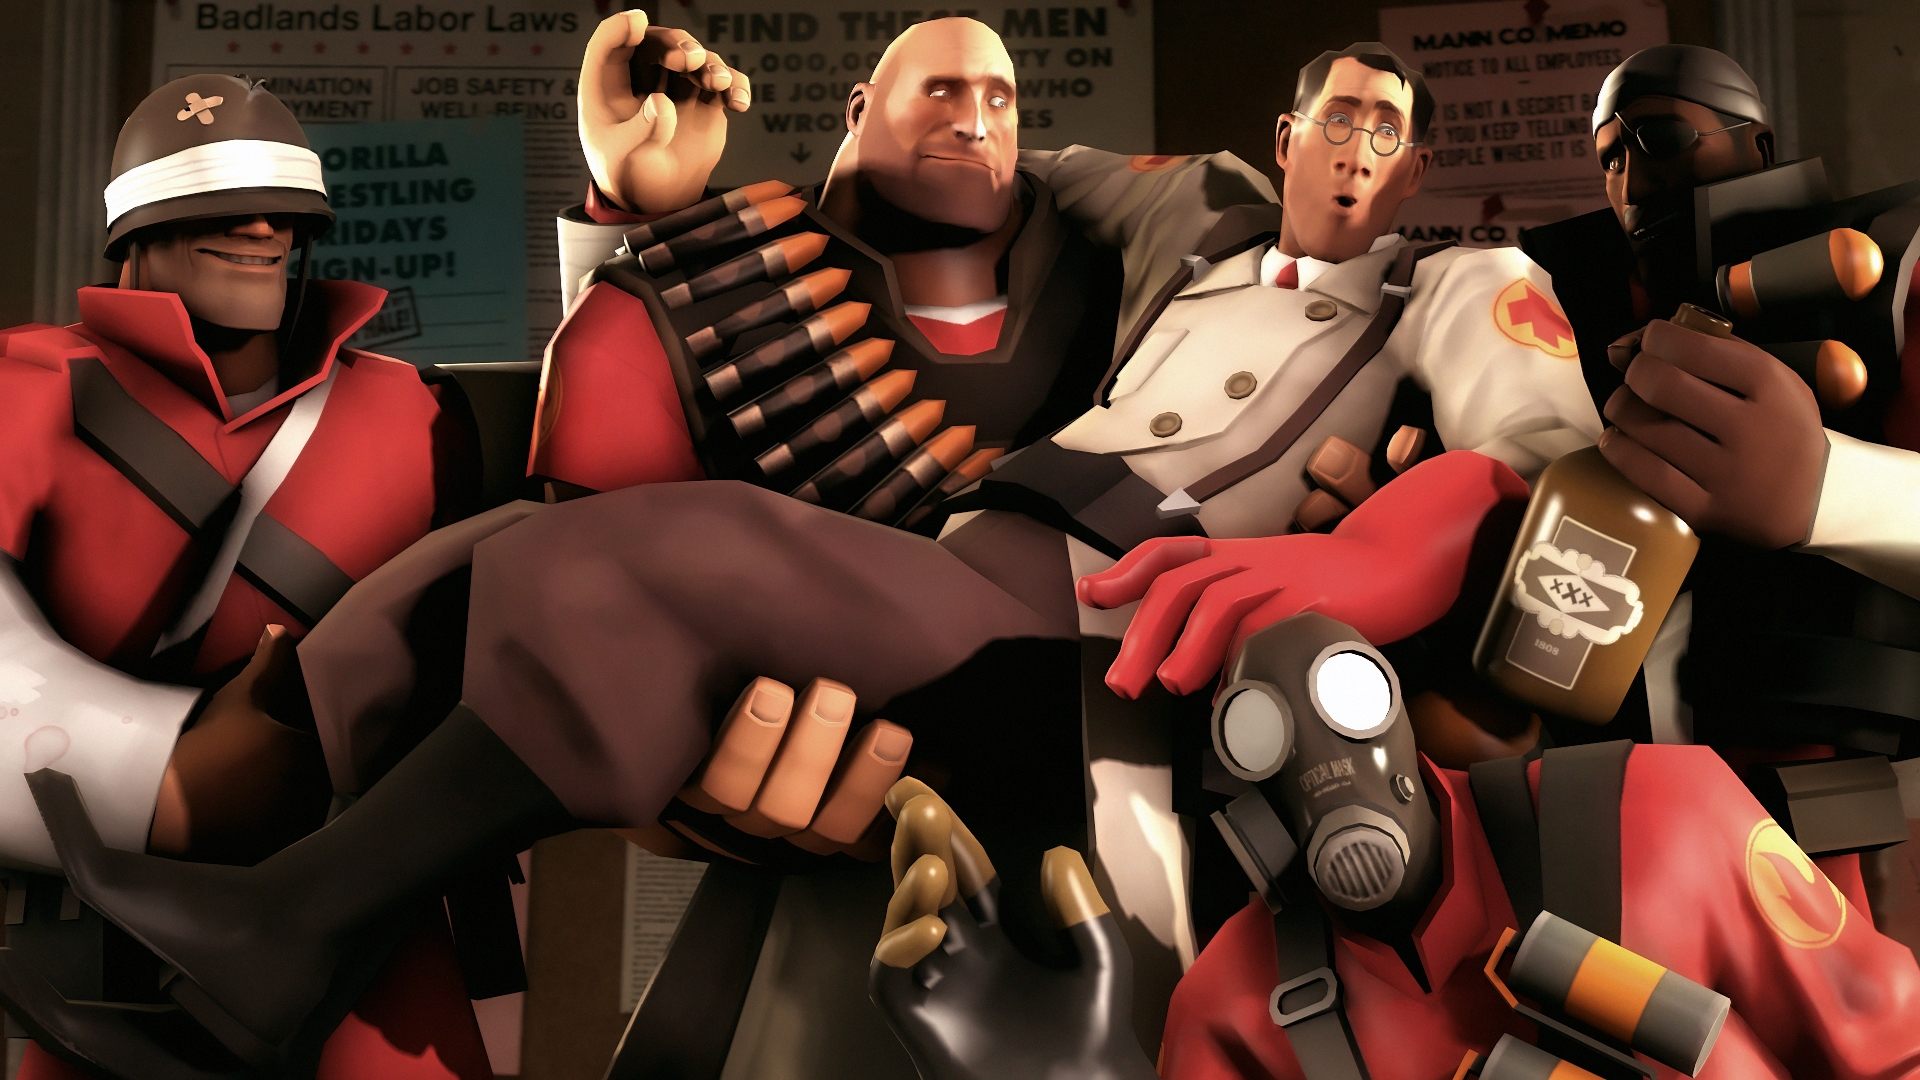 Let's talk about that medic buddies and baddies for a bit... 